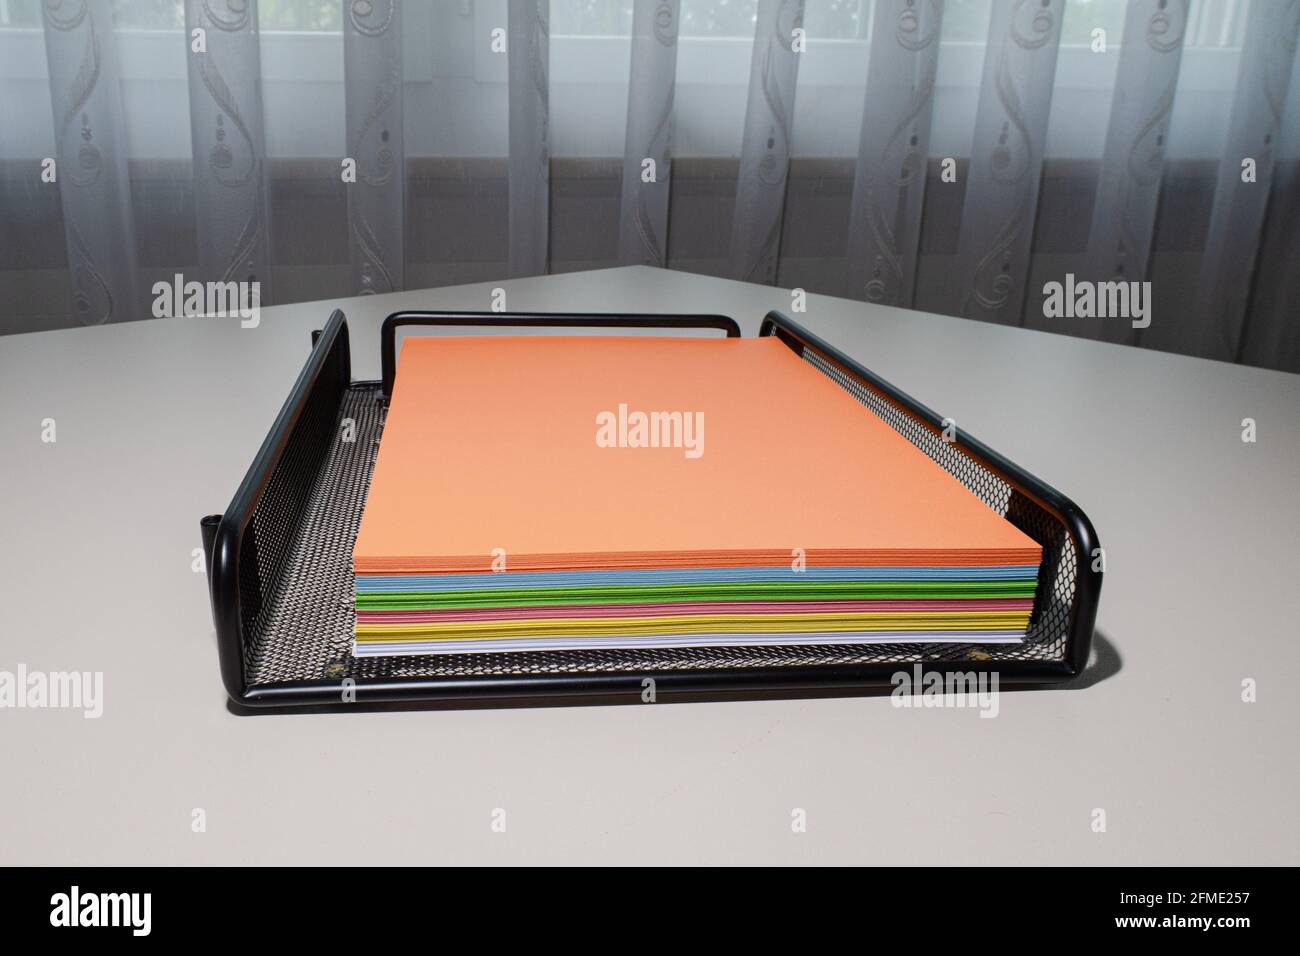 Zurich, Switzerland - June 13, 2020: The drawer with a pile of multicolored photocopy paper. Stock Photo